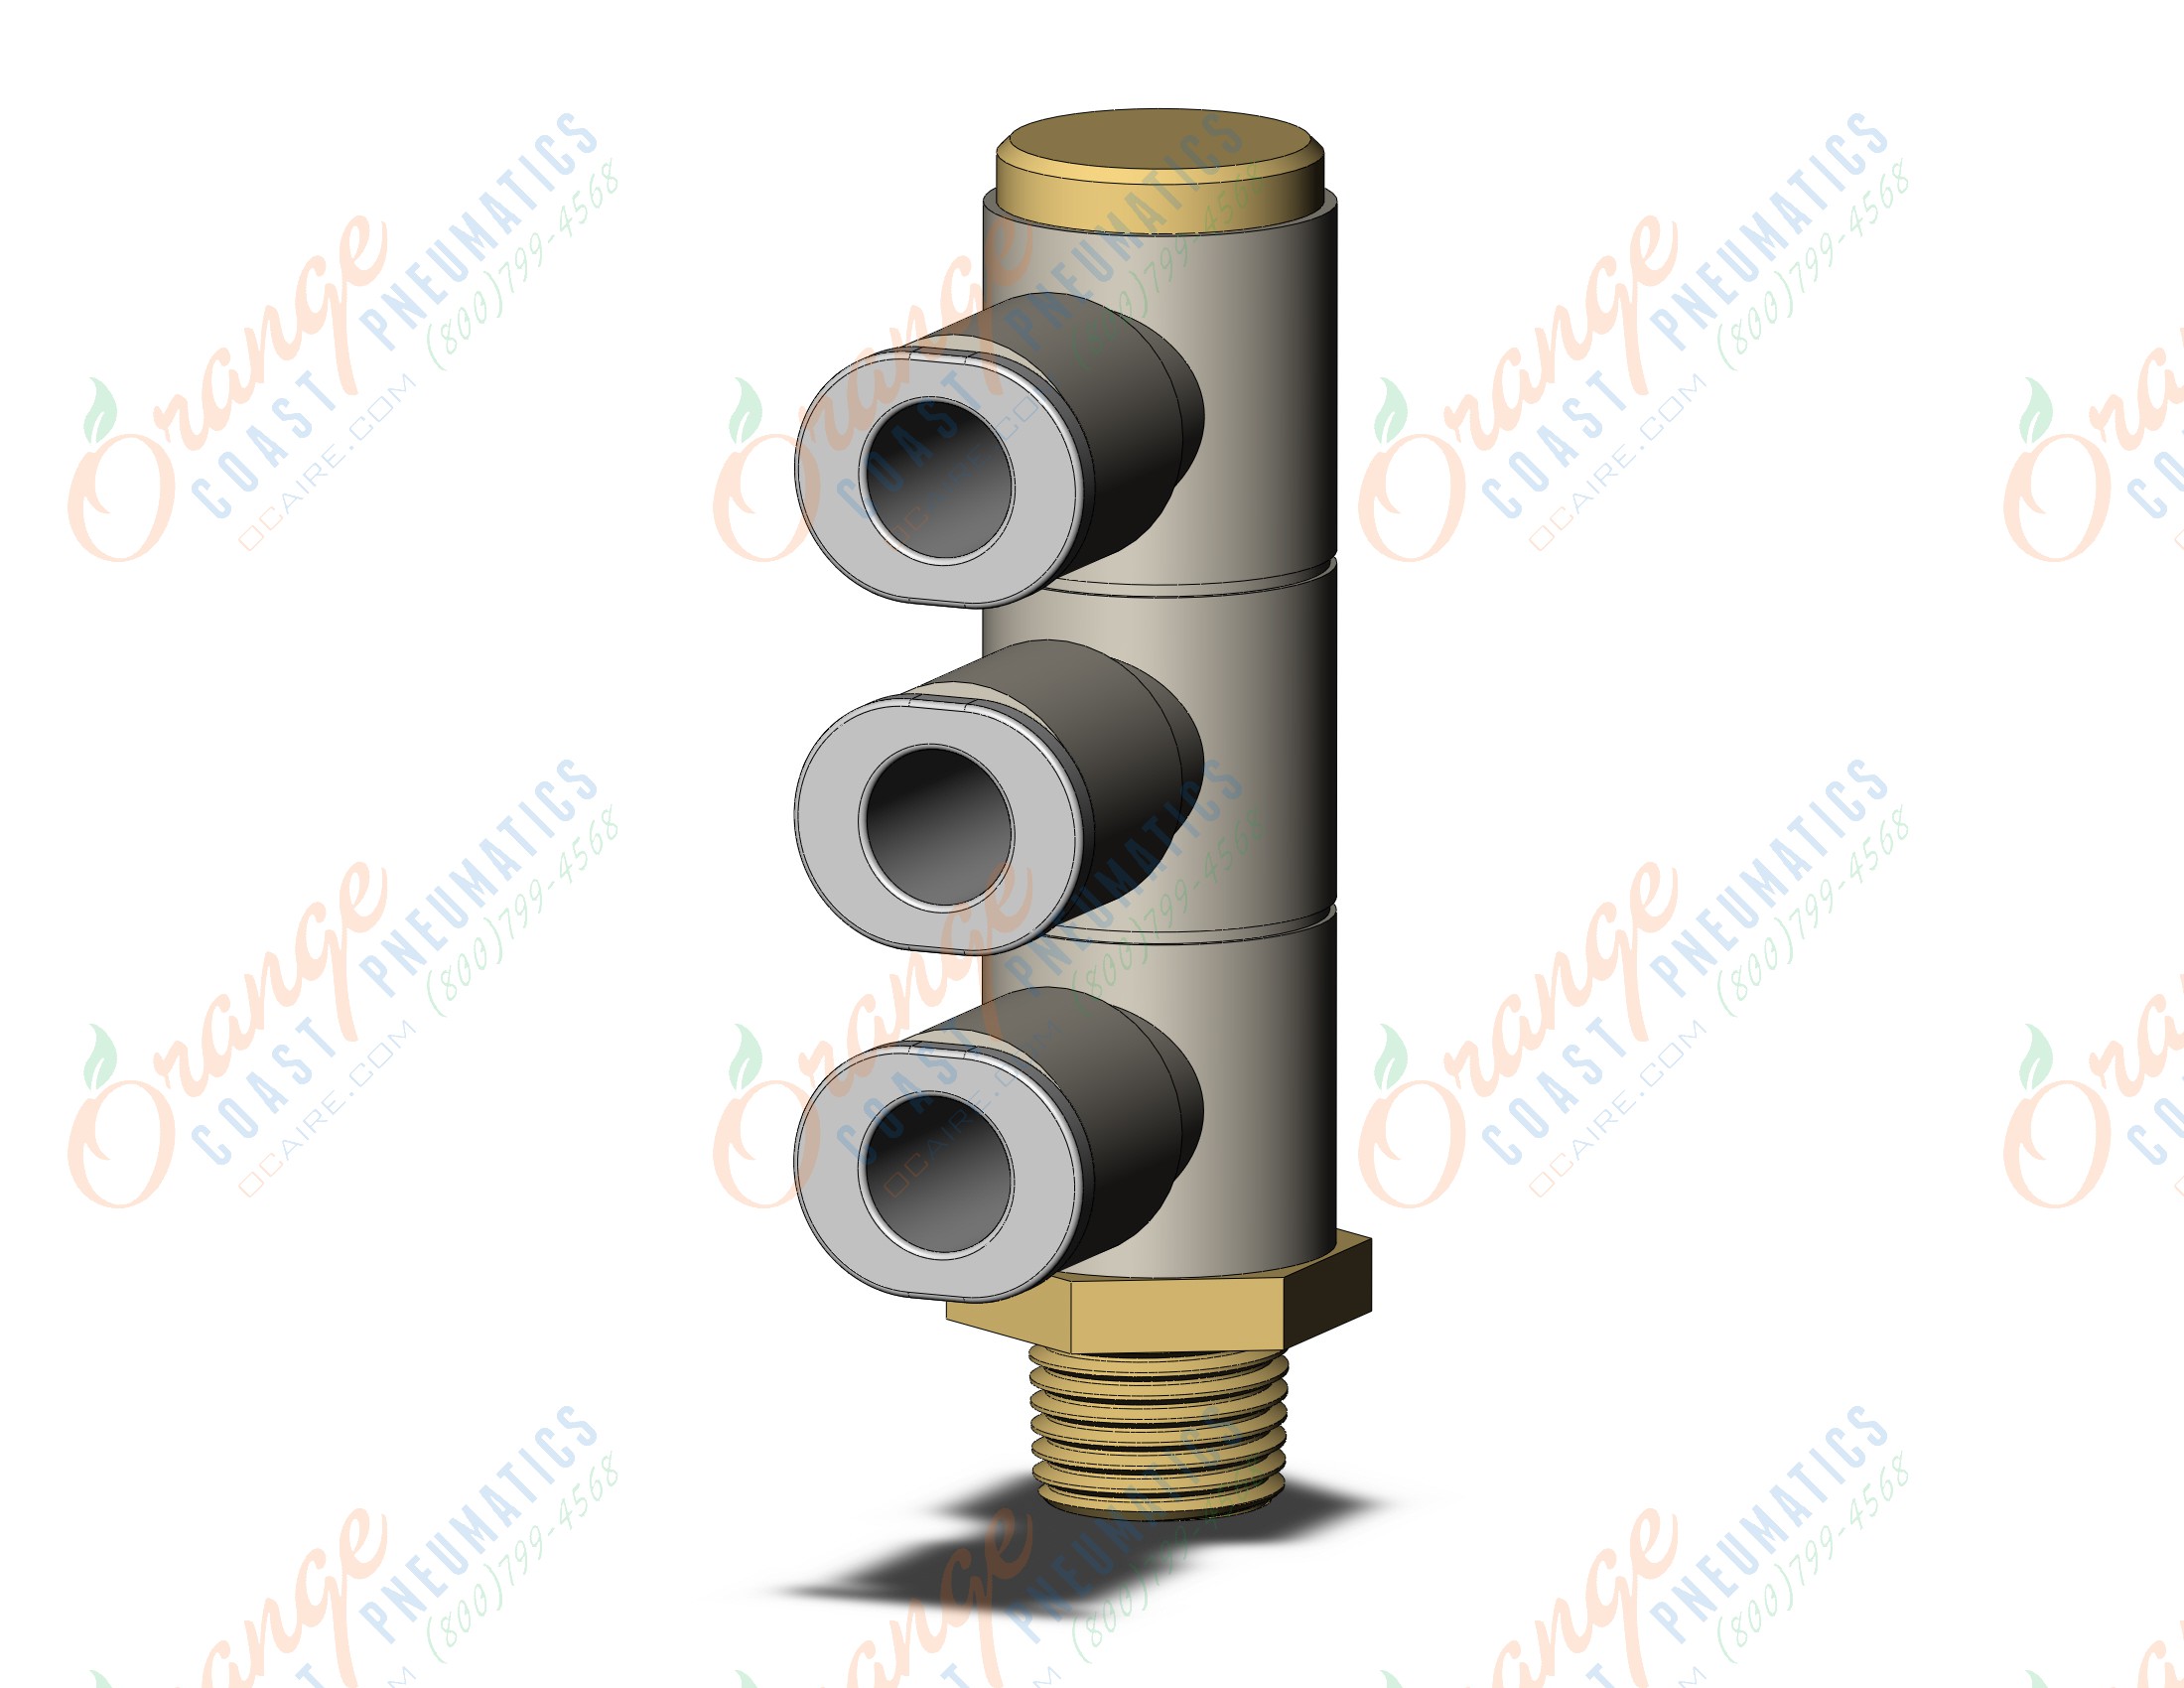 SMC KQ2VT06-01AS1 fitting, trpl uni male elbow, KQ2 FITTING (sold in packages of 10; price is per piece)